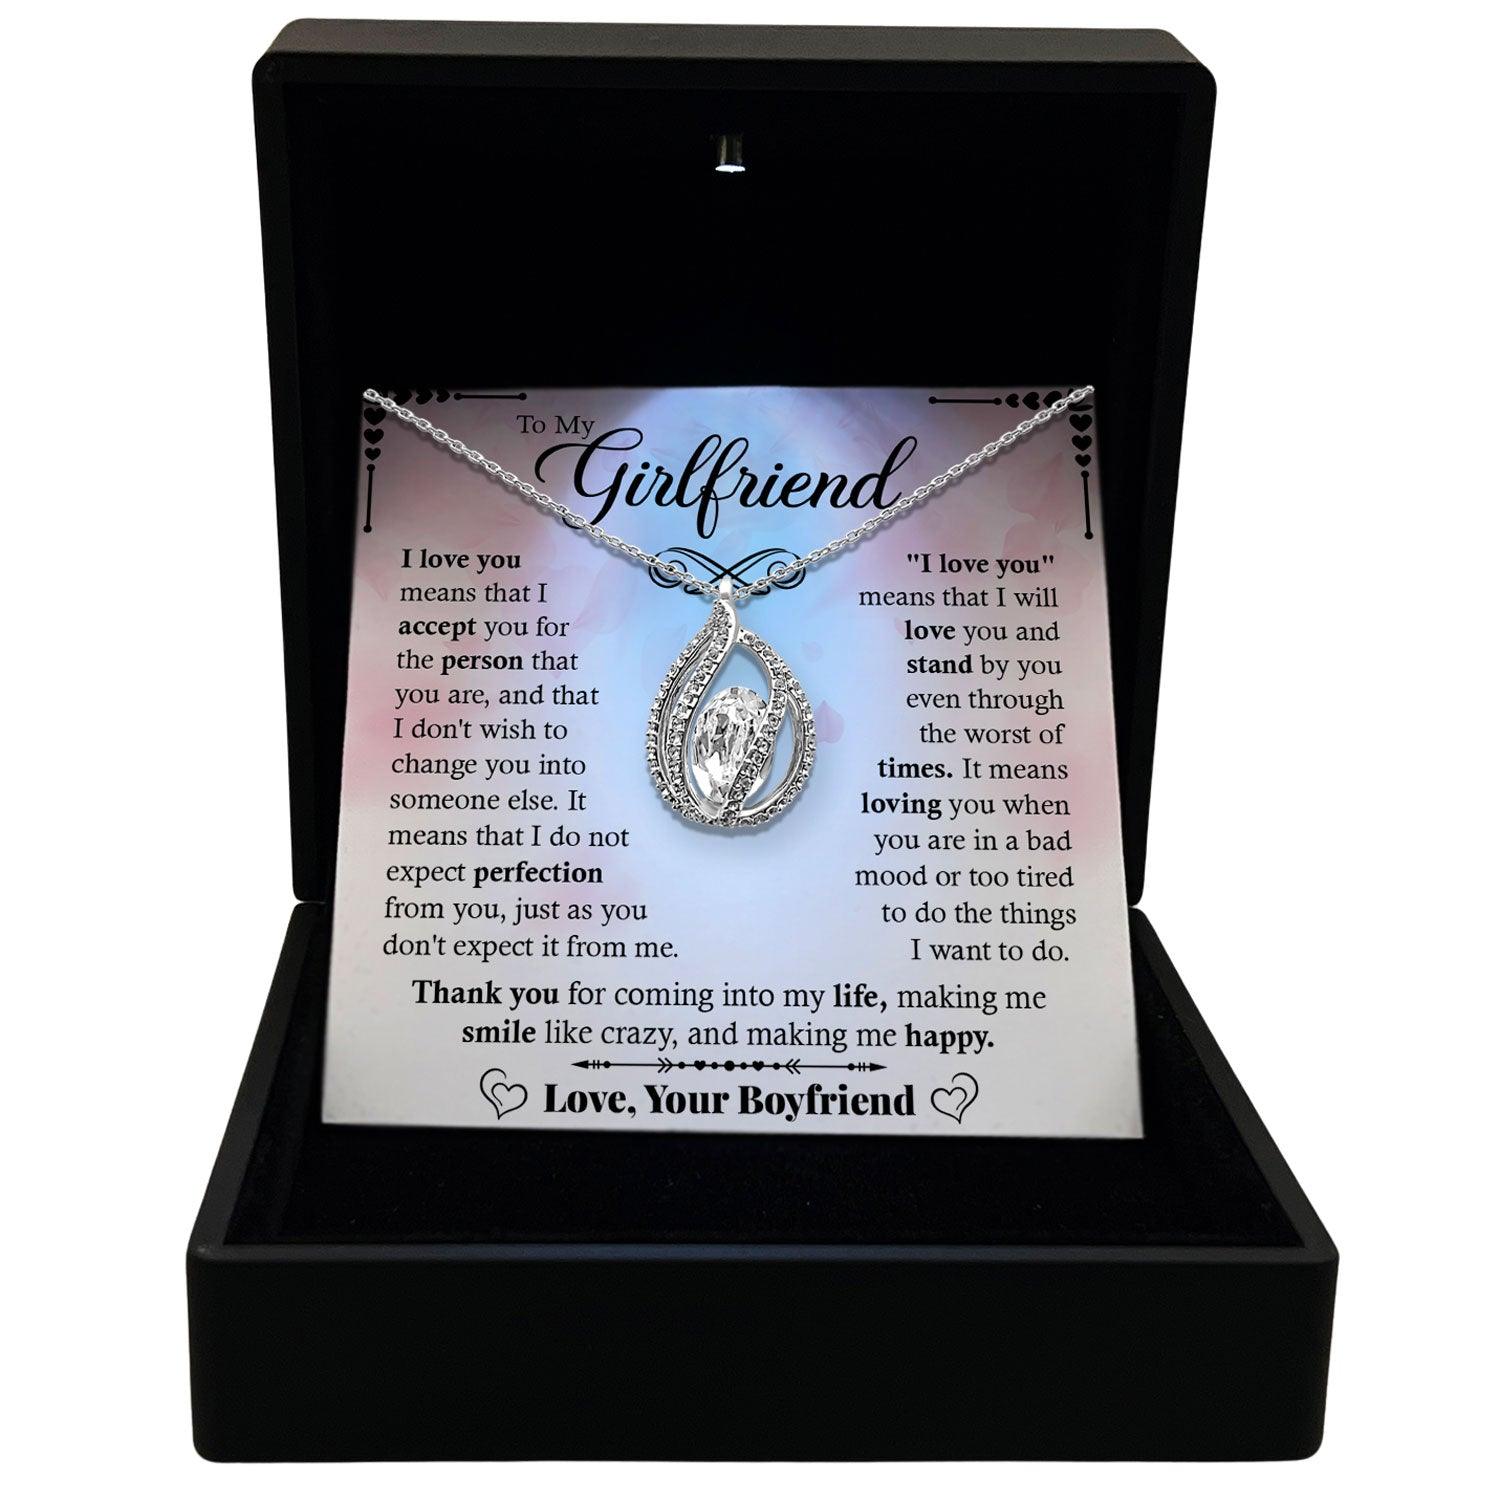 Check Out Latest Boyfriend And Girlfriend Jewelry At Affordable Price! -  GetNameNecklace